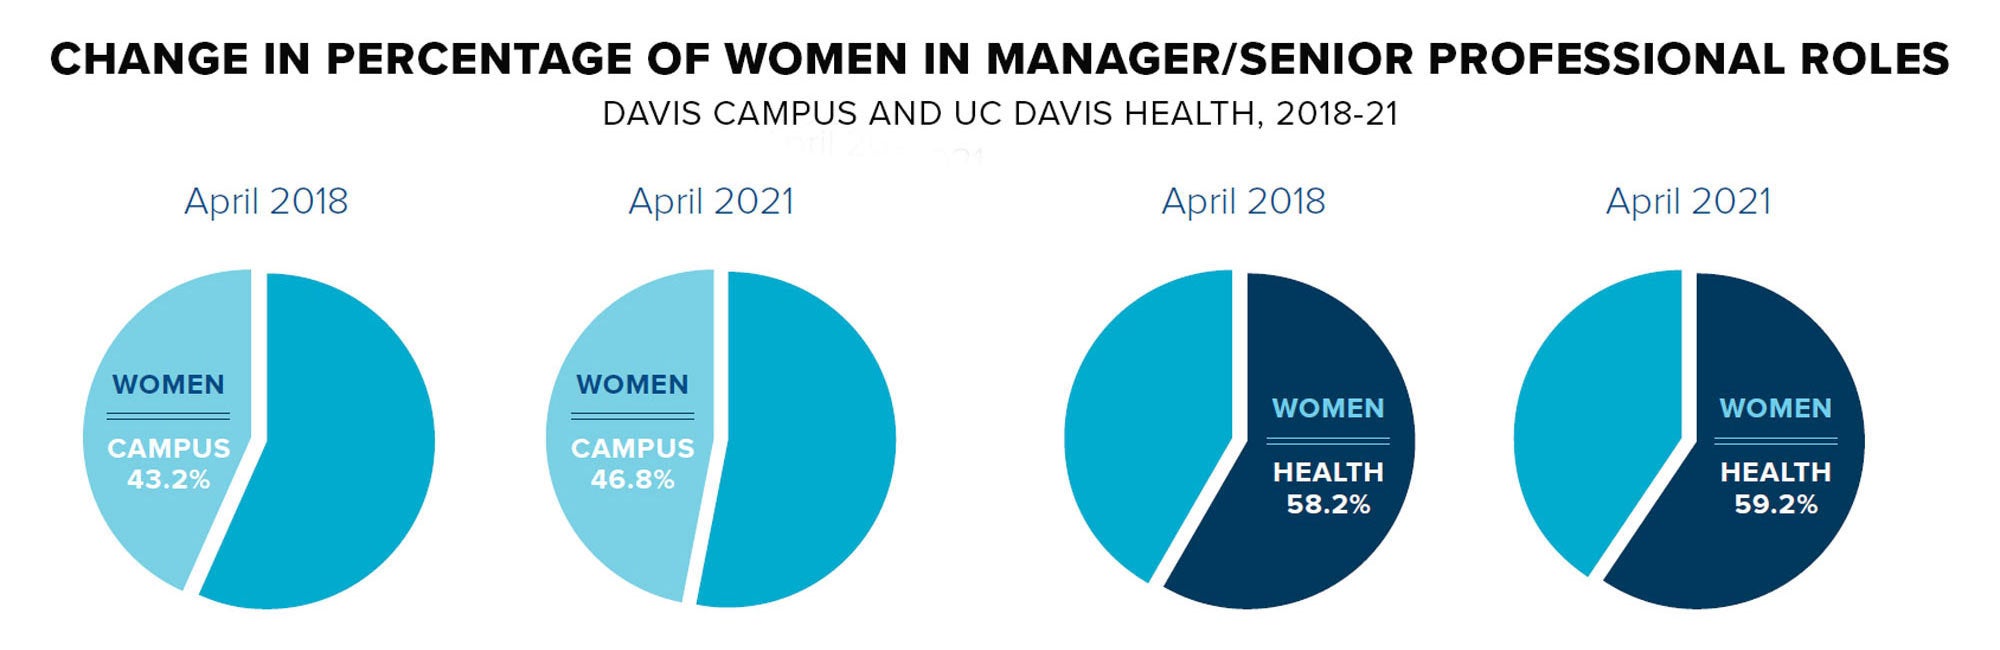 Pie charts showing increases in percentages of women in manager and senior professional roles on Davis campus (Davis campus (43.2% in 2018, 46.8% in 2021) and at UC Davis Health (58.2% in 2018, 59.2% in 2021)